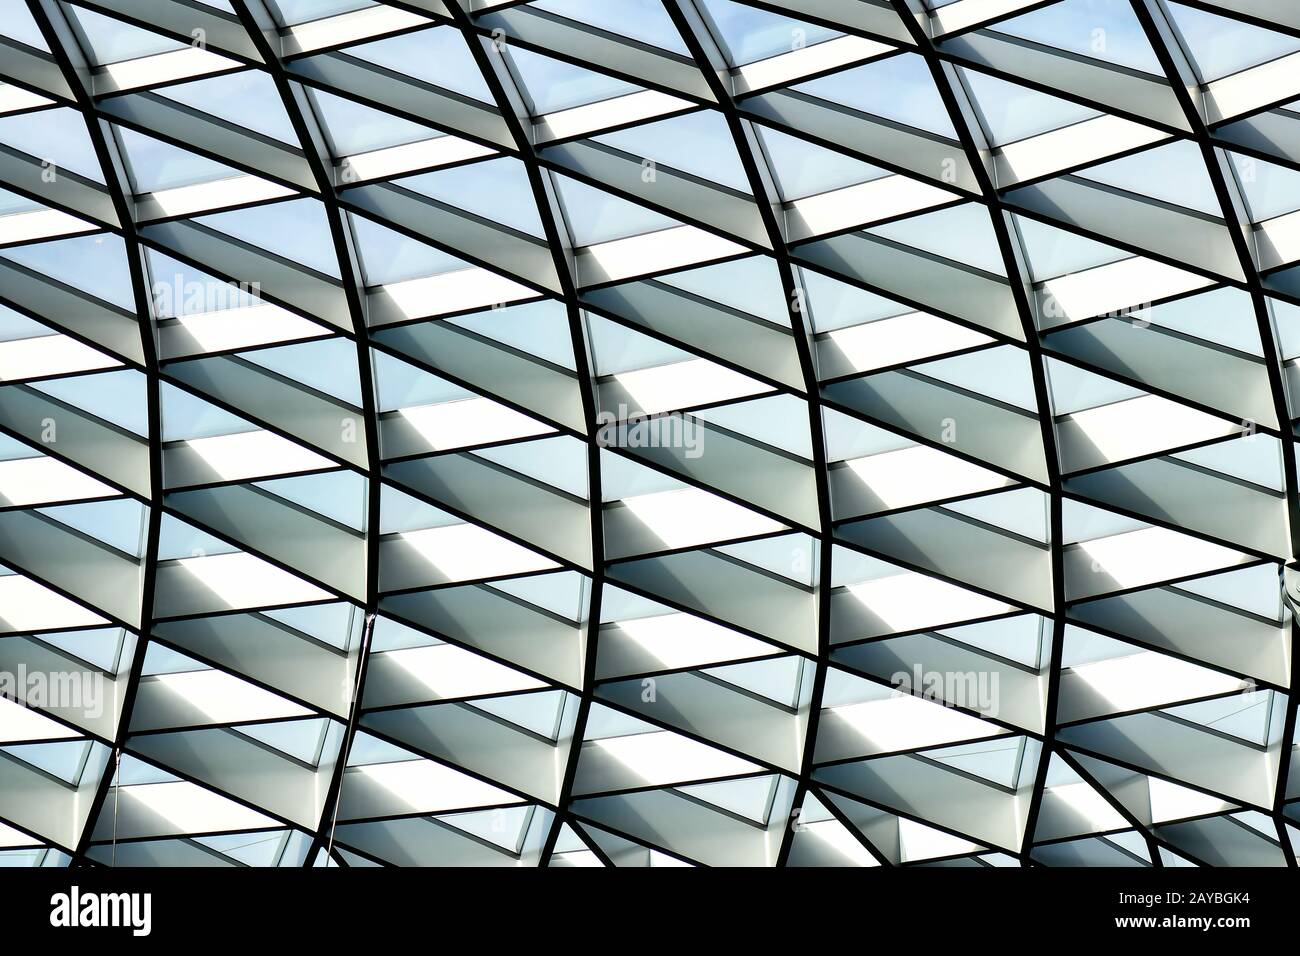 Architecture abstract building design Stock Photo